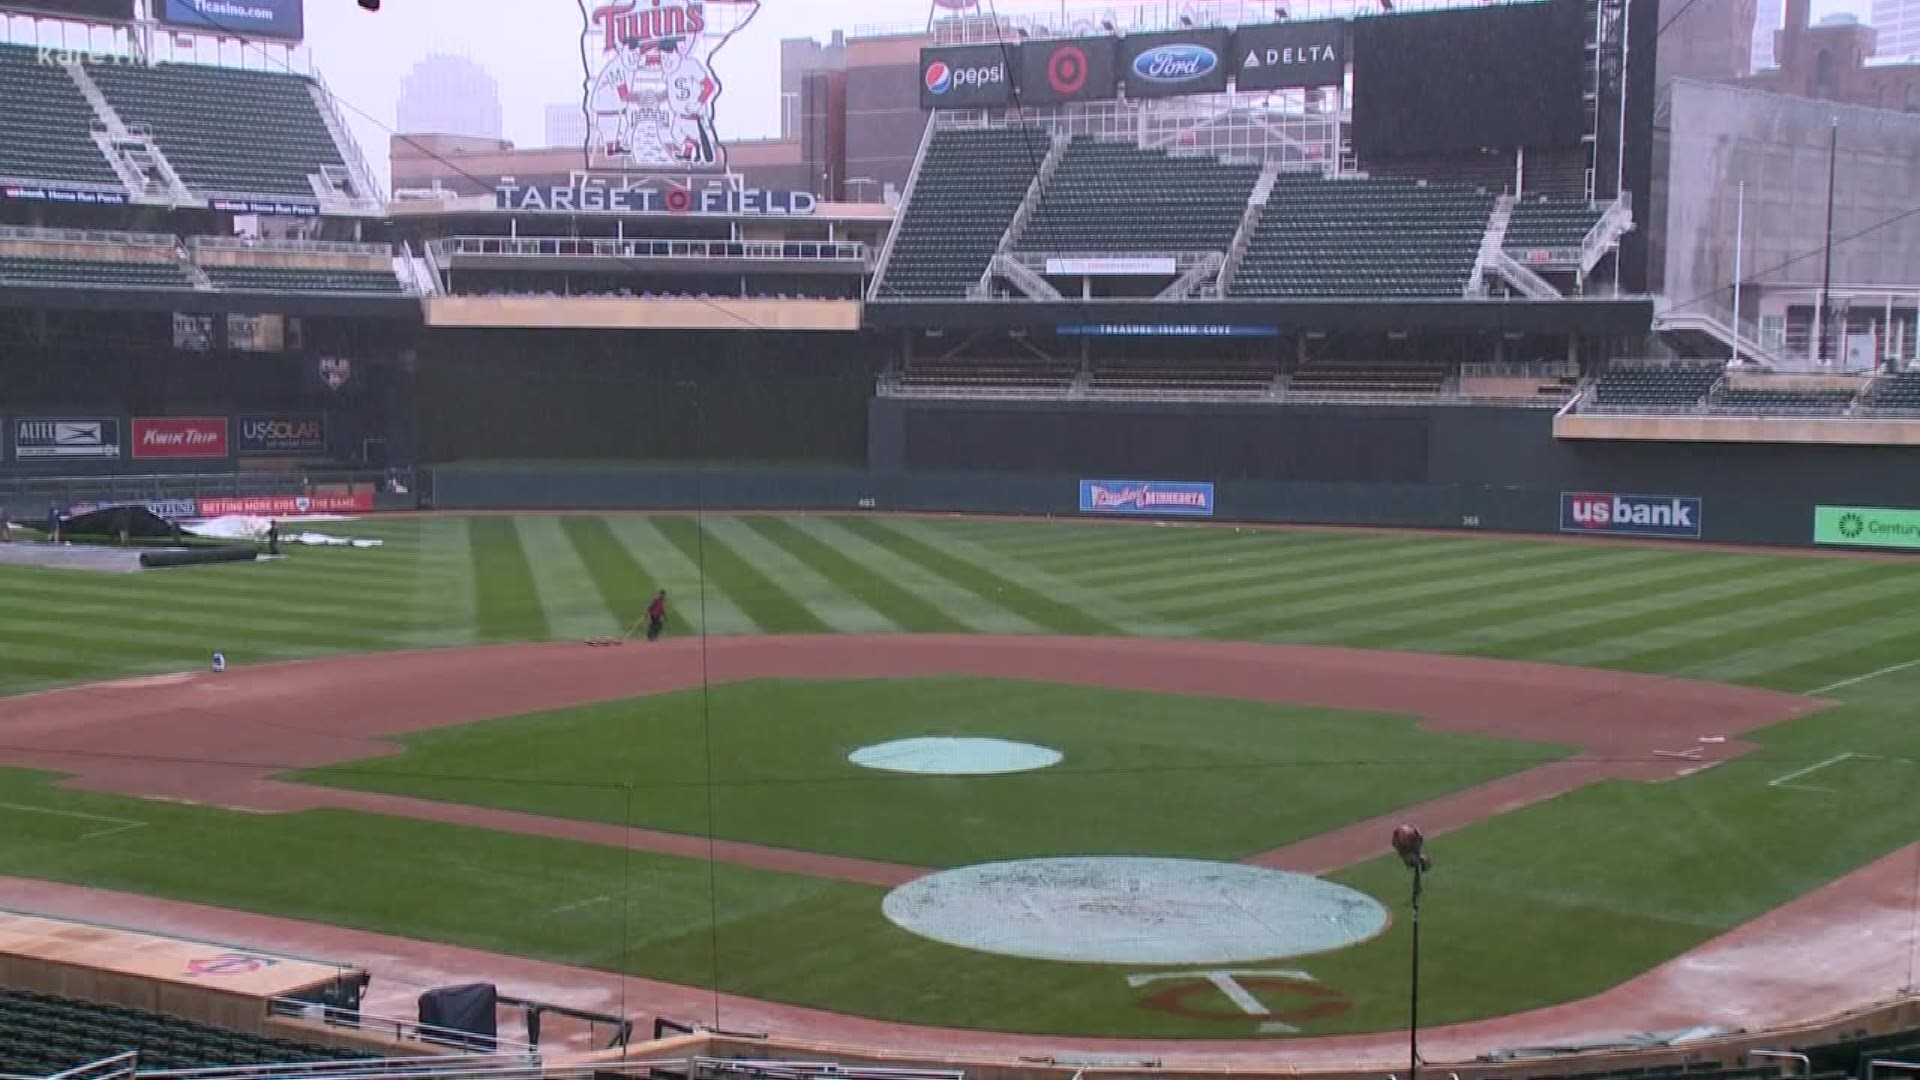 Target Field stands empty, but our opening day memories live on kare11